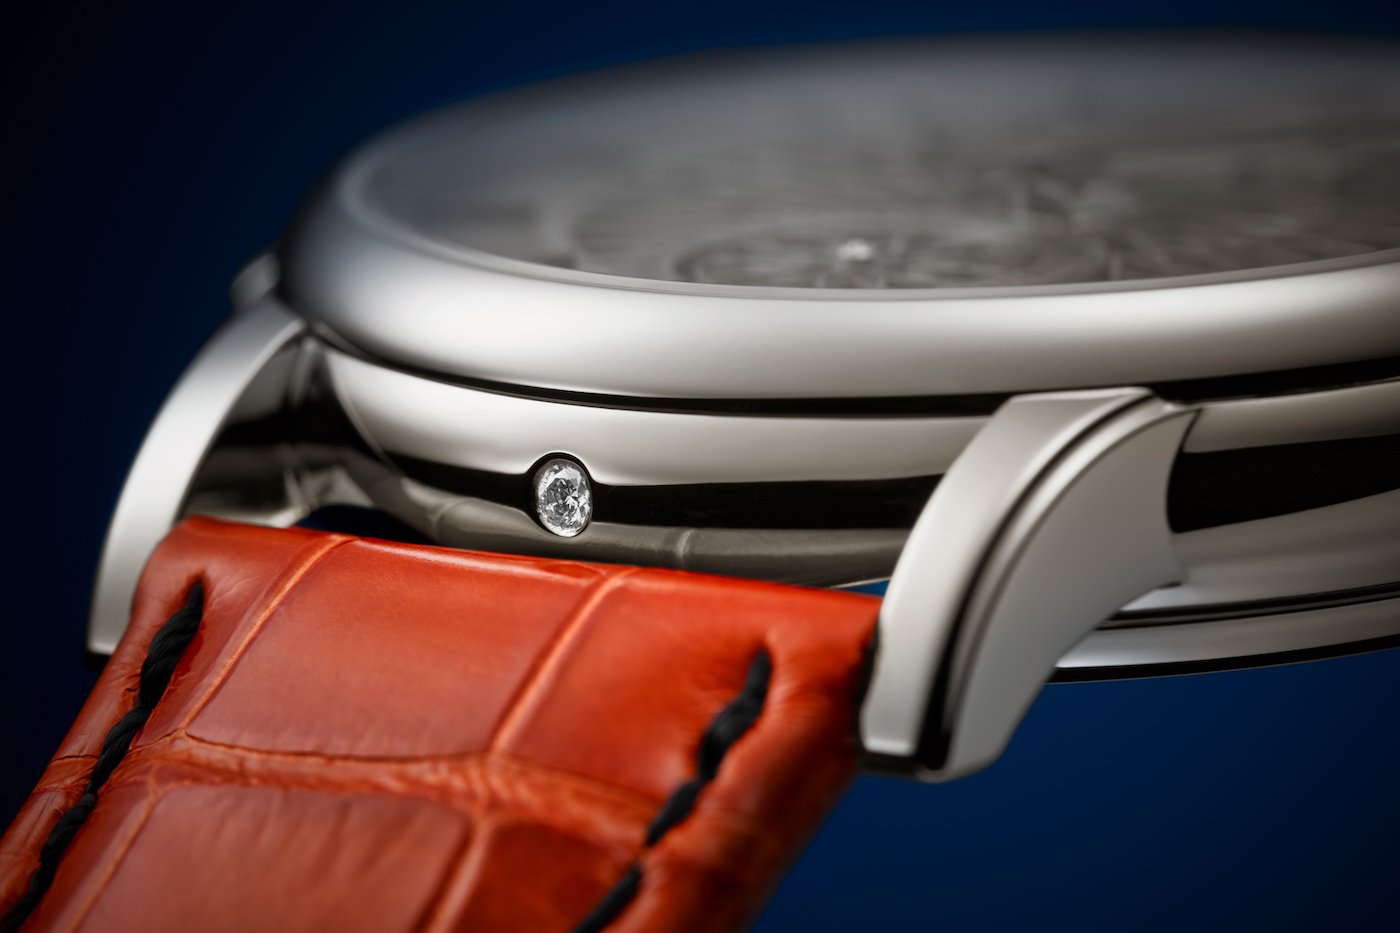 Patek Philippe “Advanced Research”: a breakthrough in chiming watches